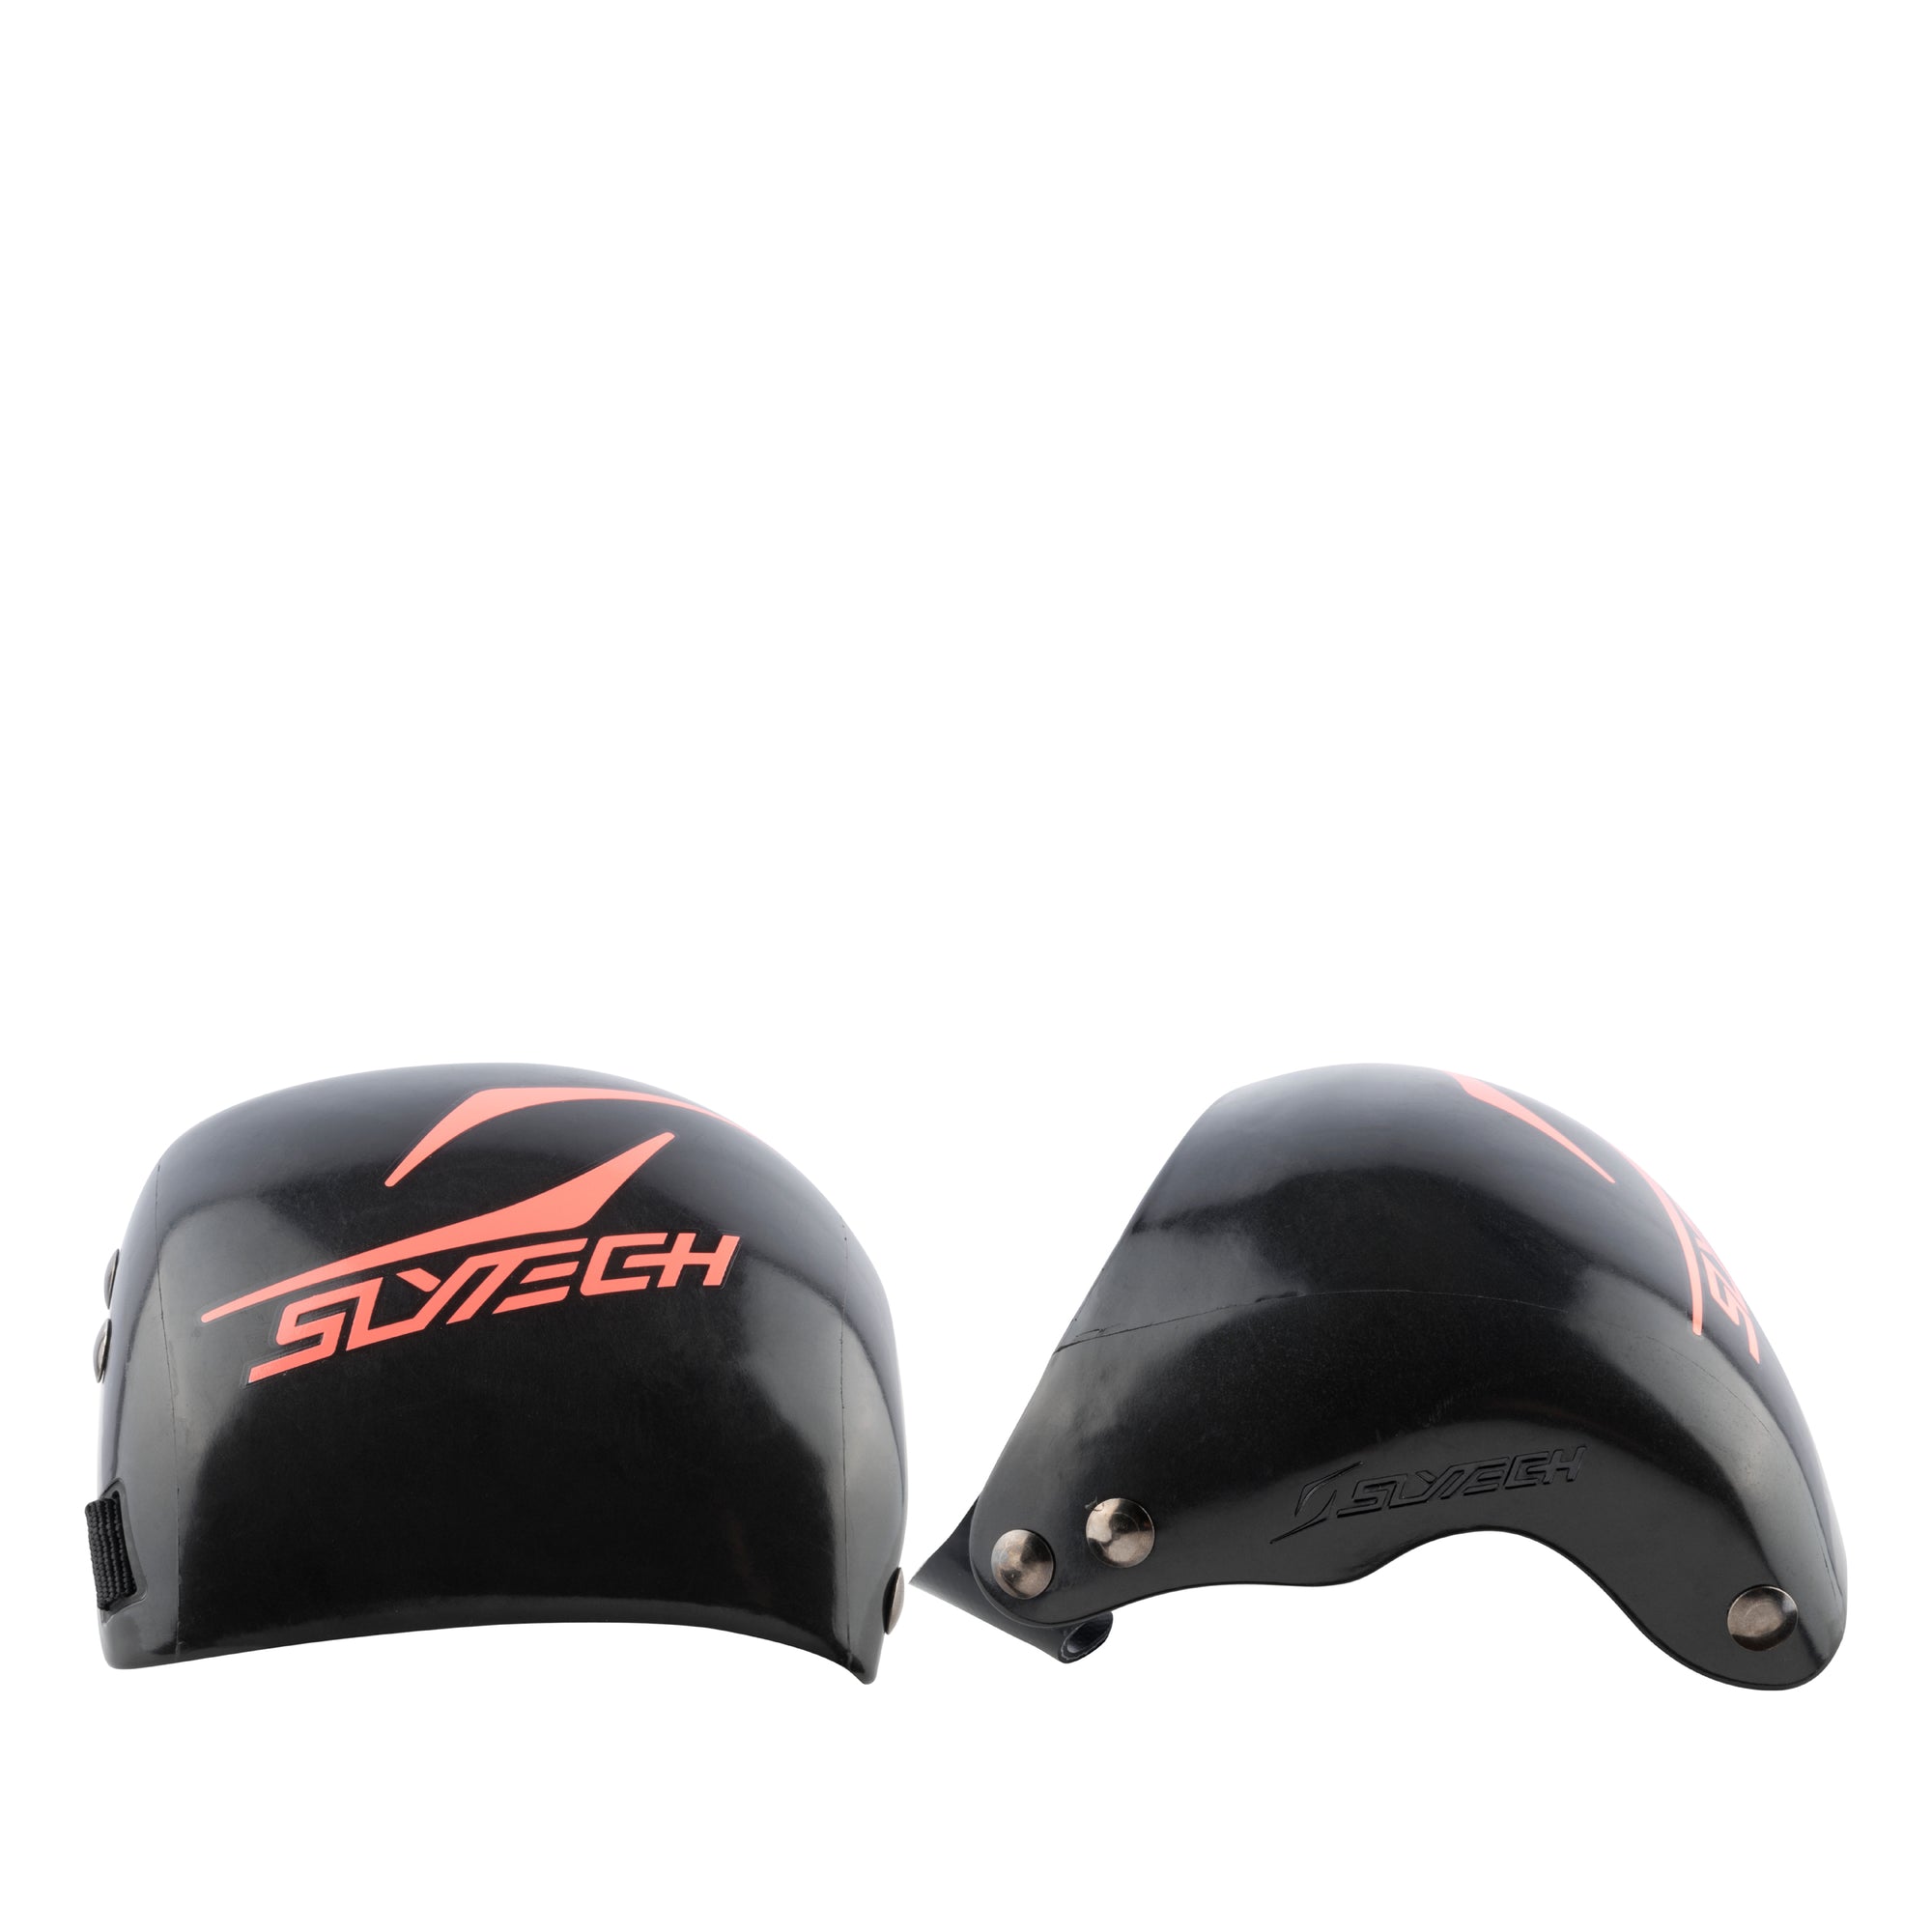 Carbon Hand Guards Black/Rust - Race Protective Gear|YSCHAGH12M,YSCHAGH12S